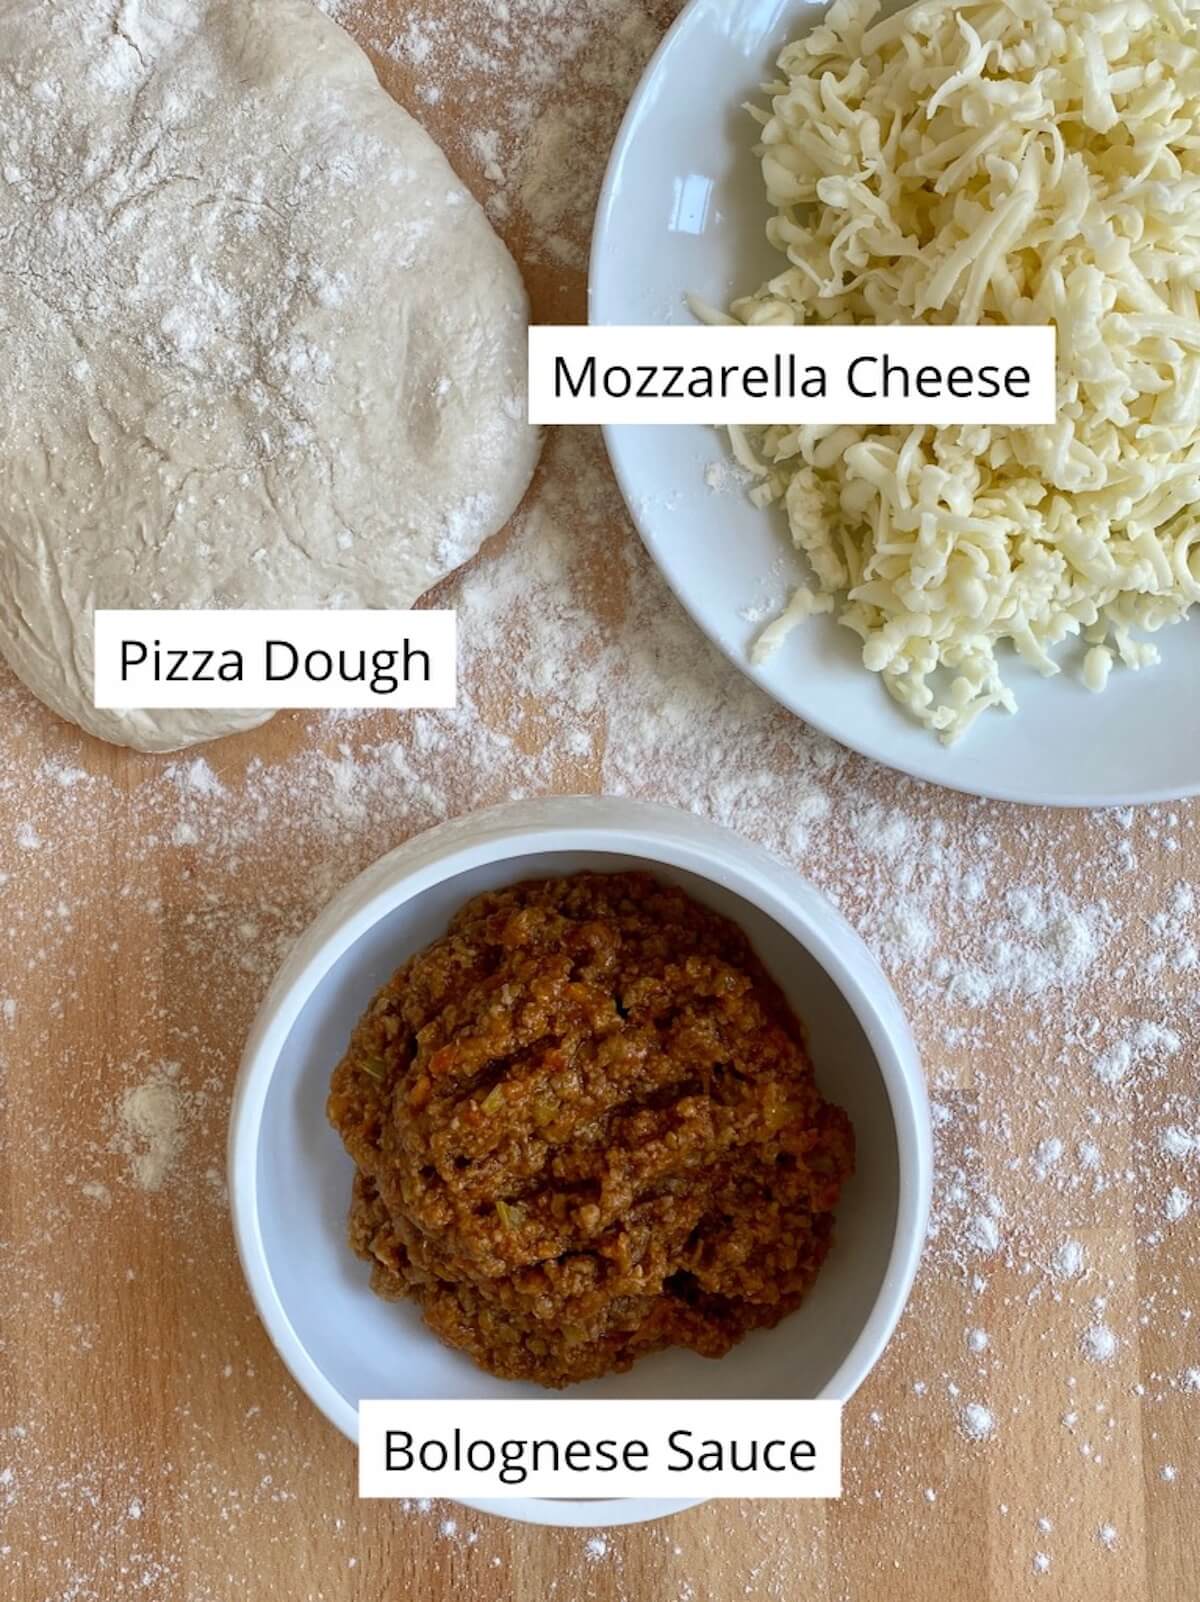 A bowl of bolognese sauce, a plate of shredded mozzarella, and a ball of pizza dough on a lightly floured surface.